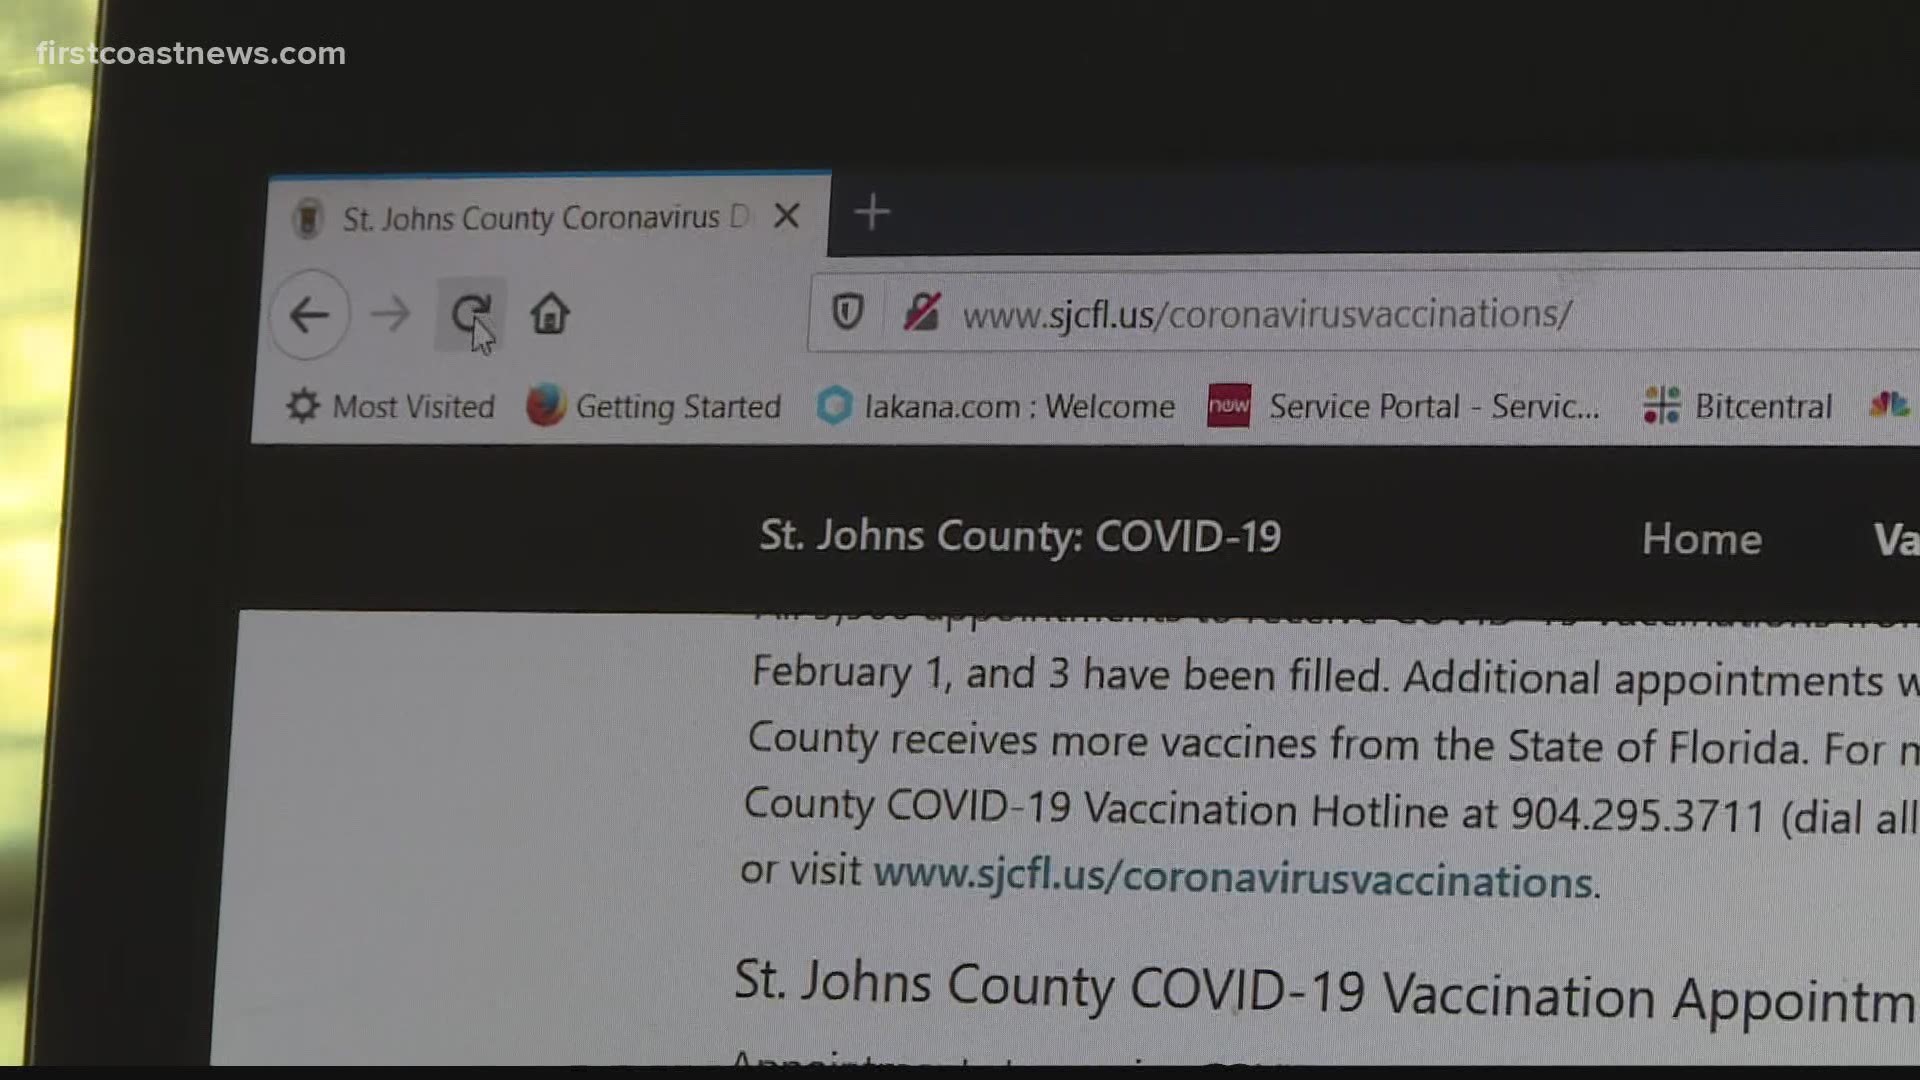 It’s been hard for many people to get through to register to get a COVID-19 vaccine. We're On Your Side with how to maneuver online to get that vaccine appointment.